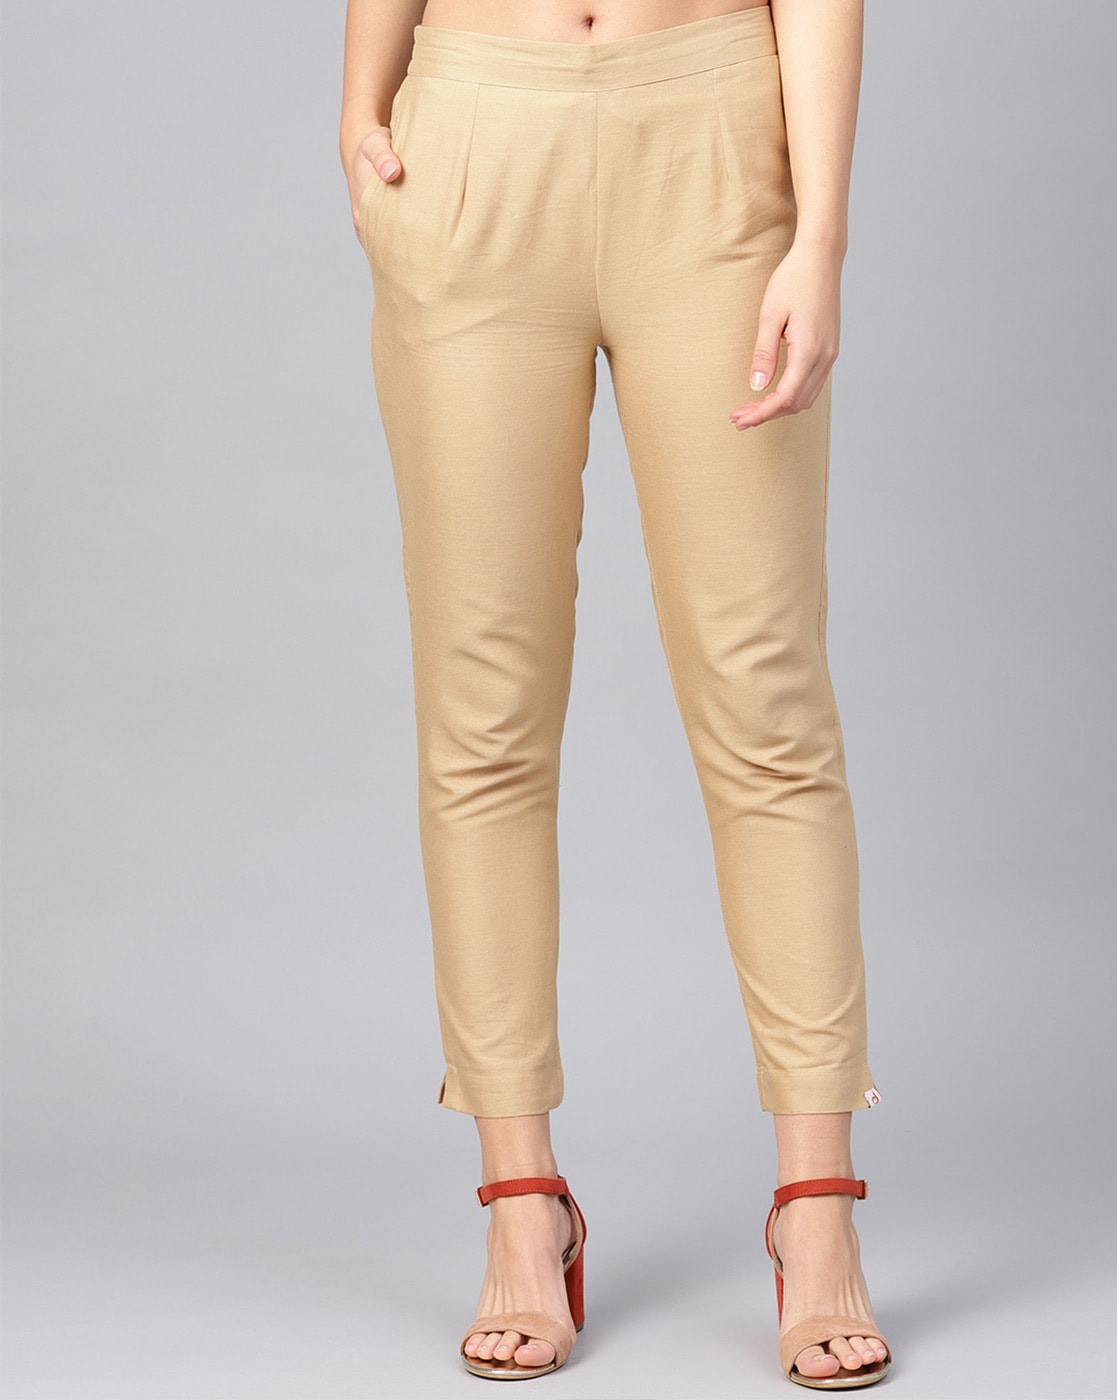 White Pant for Women  Ankle Trousers women  SAINLY